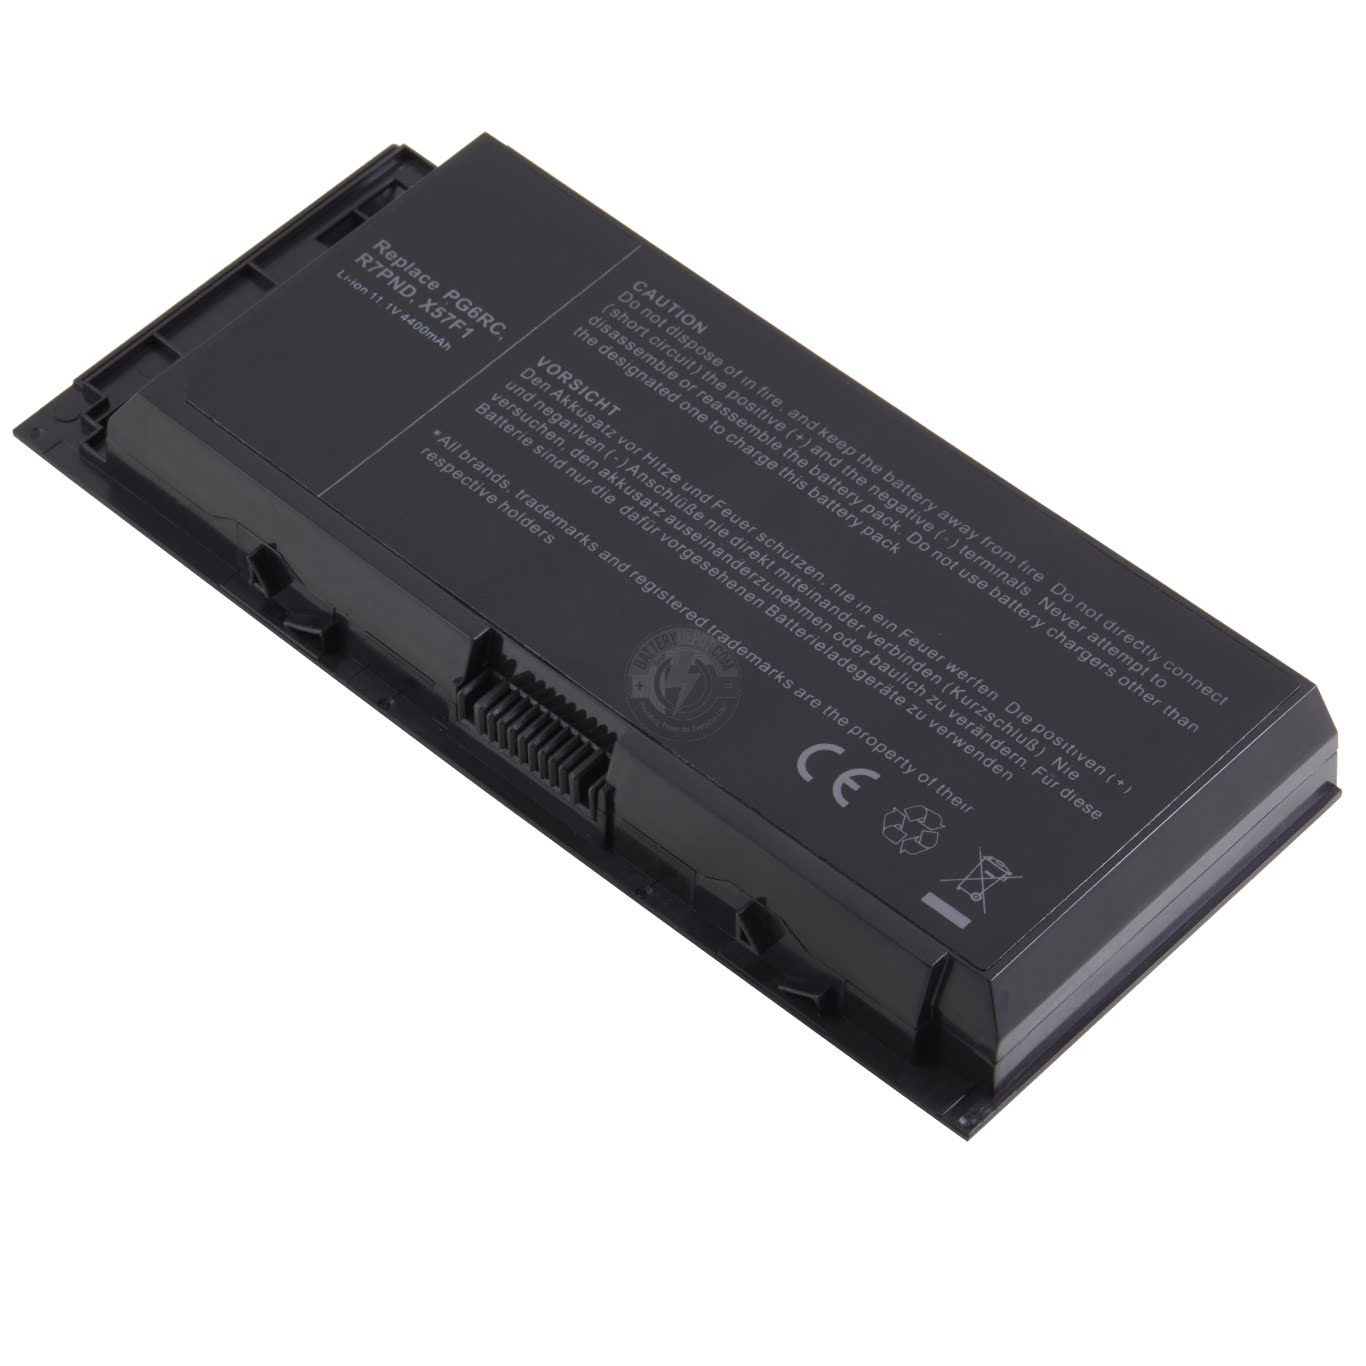 0FVWT4, 0TN1K5 replacement Laptop Battery for Dell Precision M4600, Precision M4700, 11.1V, 4400mAh, 6 cells